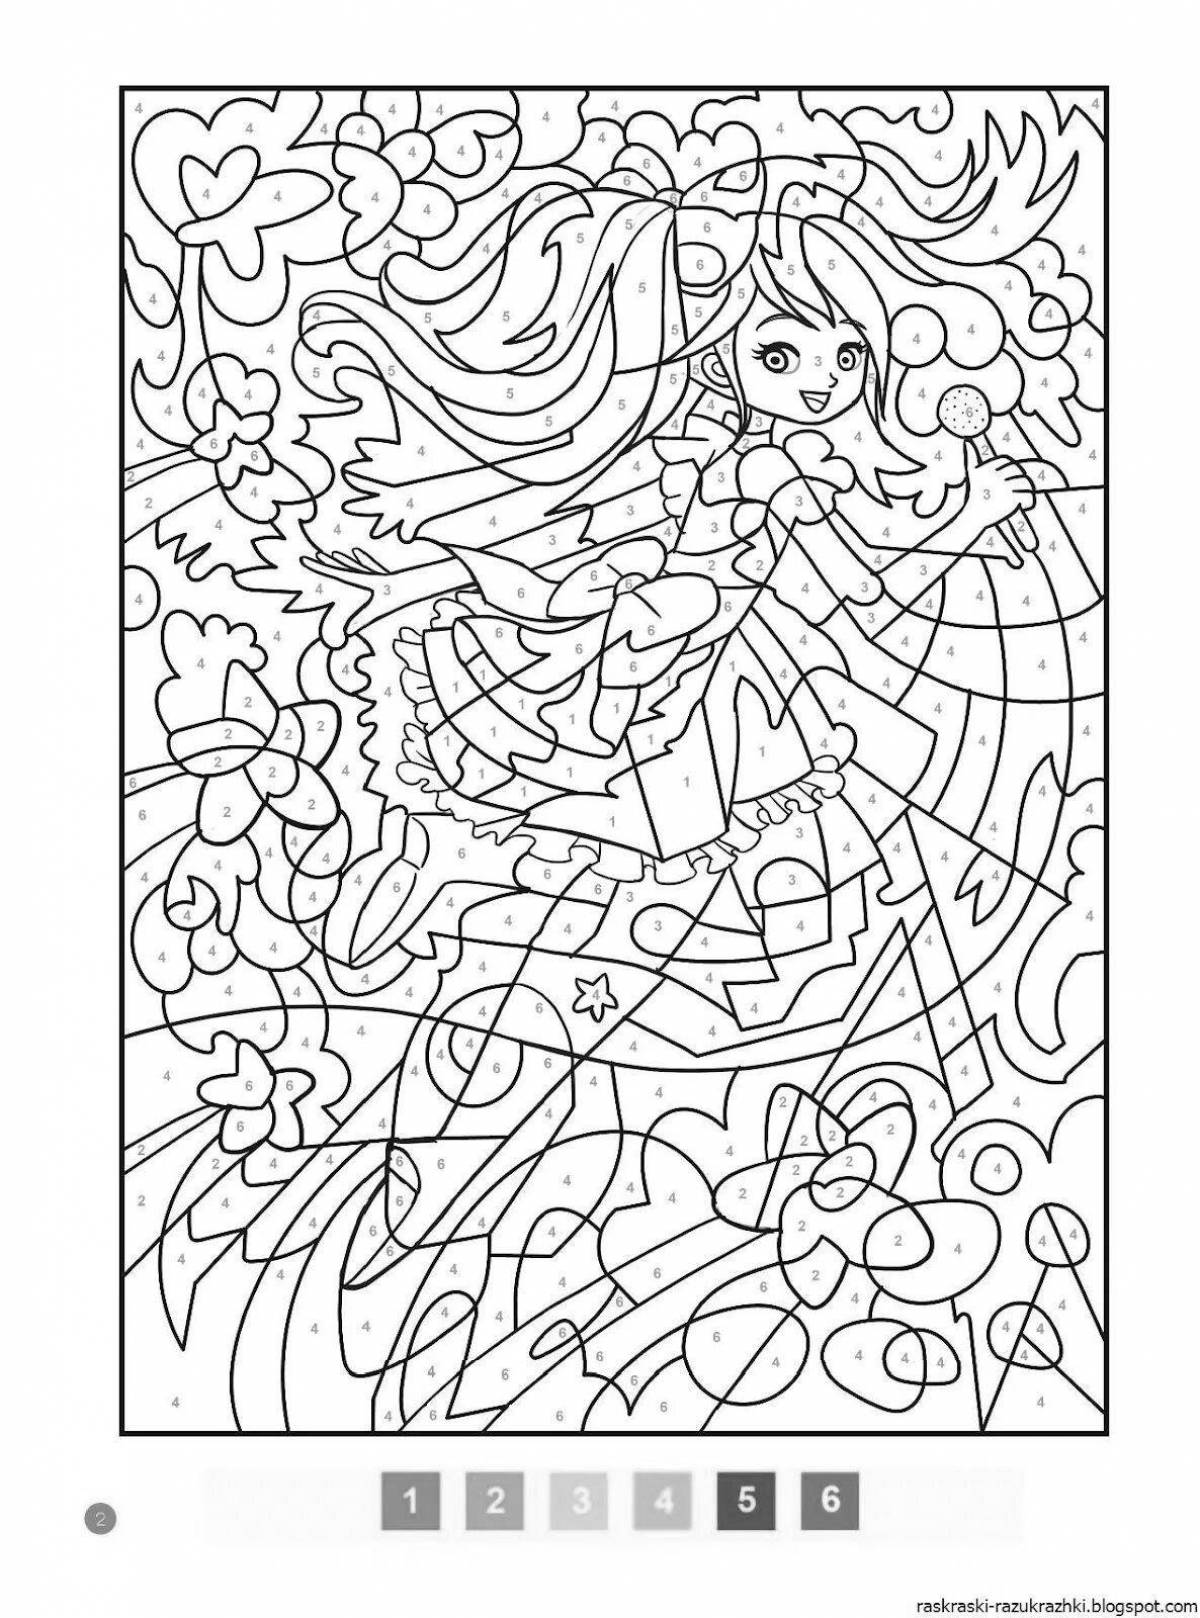 Fun coloring by number for all adults